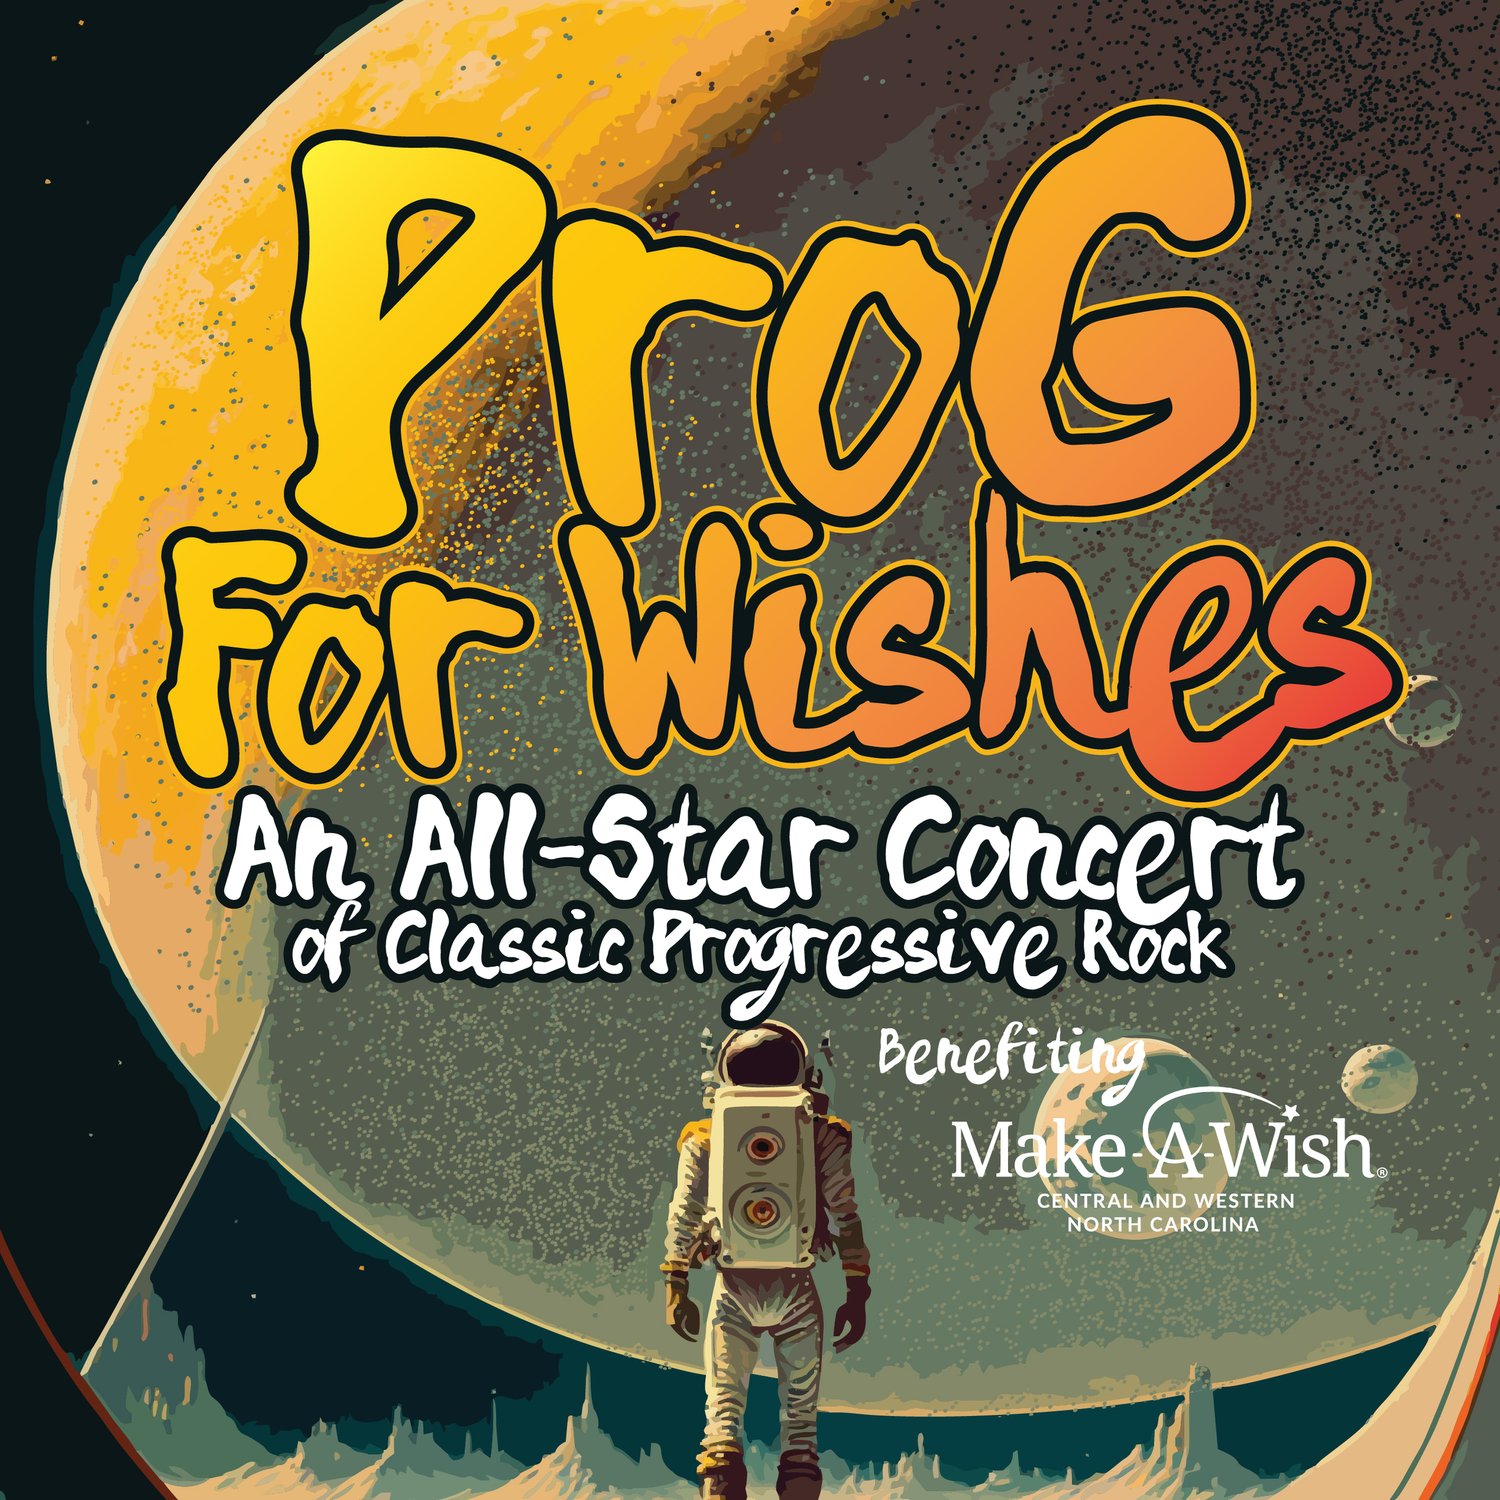 Prog For Wishes